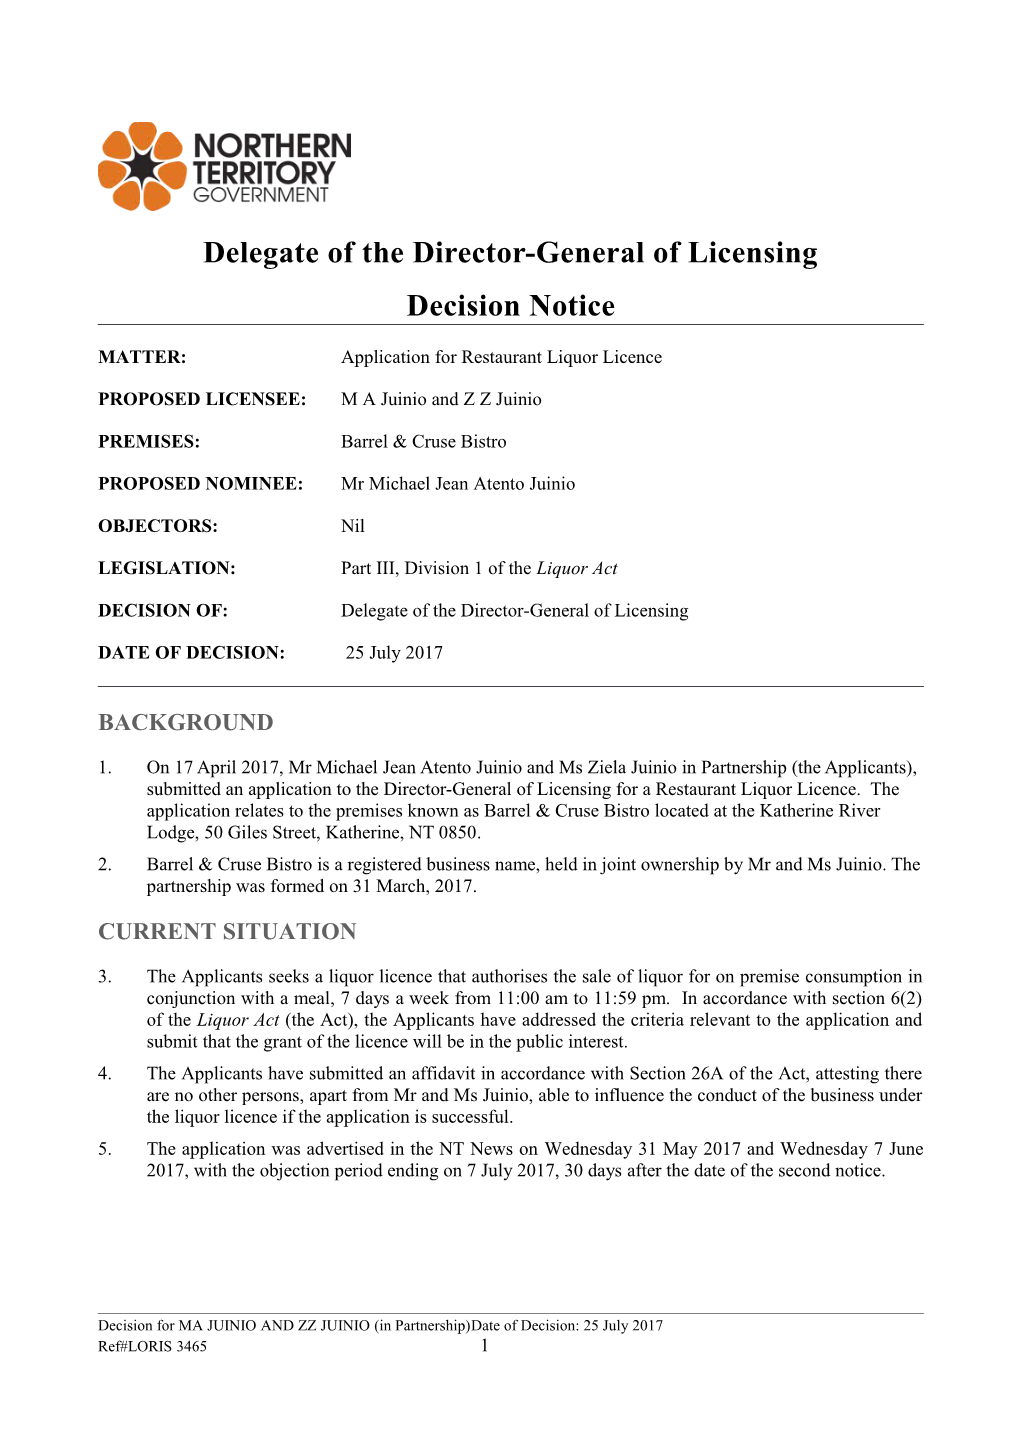 Delegate of the Director-General Decision Notice Template